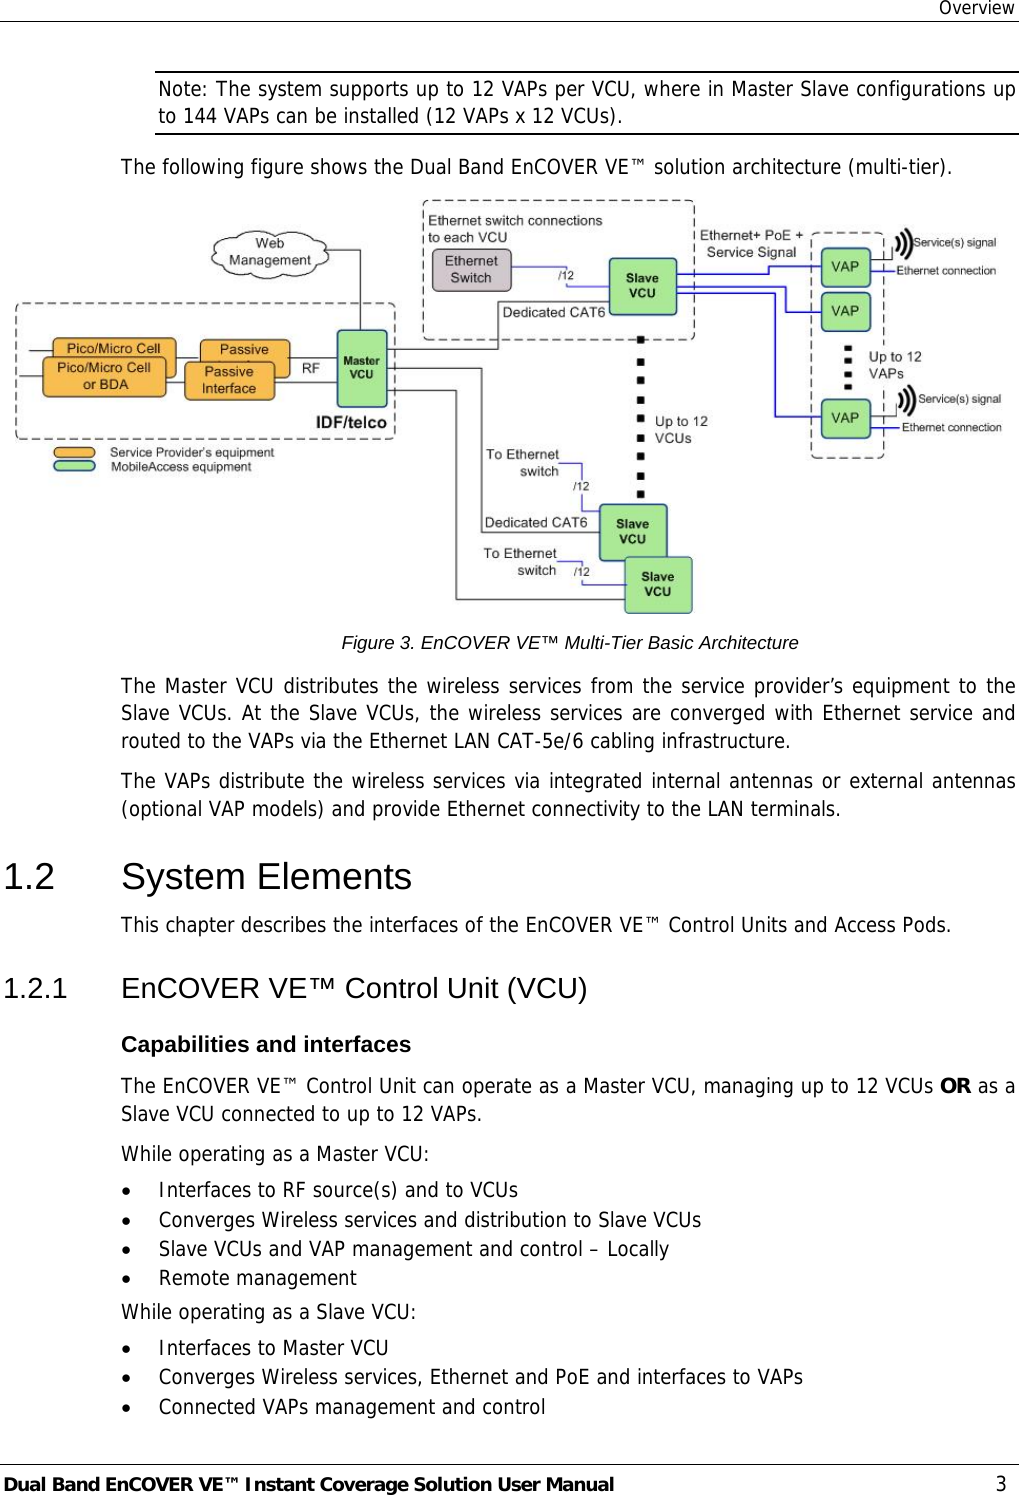 Overview Dual Band EnCOVER VE™ Instant Coverage Solution User Manual  3 Note: The system supports up to 12 VAPs per VCU, where in Master Slave configurations up to 144 VAPs can be installed (12 VAPs x 12 VCUs). The following figure shows the Dual Band EnCOVER VE™ solution architecture (multi-tier).  Figure 3. EnCOVER VE™ Multi-Tier Basic Architecture The Master VCU distributes the wireless services from the service provider’s equipment to the Slave VCUs. At the Slave VCUs, the wireless services are converged with Ethernet service and routed to the VAPs via the Ethernet LAN CAT-5e/6 cabling infrastructure.   The VAPs distribute the wireless services via integrated internal antennas or external antennas (optional VAP models) and provide Ethernet connectivity to the LAN terminals. 1.2 System Elements This chapter describes the interfaces of the EnCOVER VE™ Control Units and Access Pods.  1.2.1  EnCOVER VE™ Control Unit (VCU) Capabilities and interfaces The EnCOVER VE™ Control Unit can operate as a Master VCU, managing up to 12 VCUs OR as a Slave VCU connected to up to 12 VAPs. While operating as a Master VCU: • Interfaces to RF source(s) and to VCUs • Converges Wireless services and distribution to Slave VCUs • Slave VCUs and VAP management and control – Locally • Remote management  While operating as a Slave VCU: • Interfaces to Master VCU • Converges Wireless services, Ethernet and PoE and interfaces to VAPs • Connected VAPs management and control 